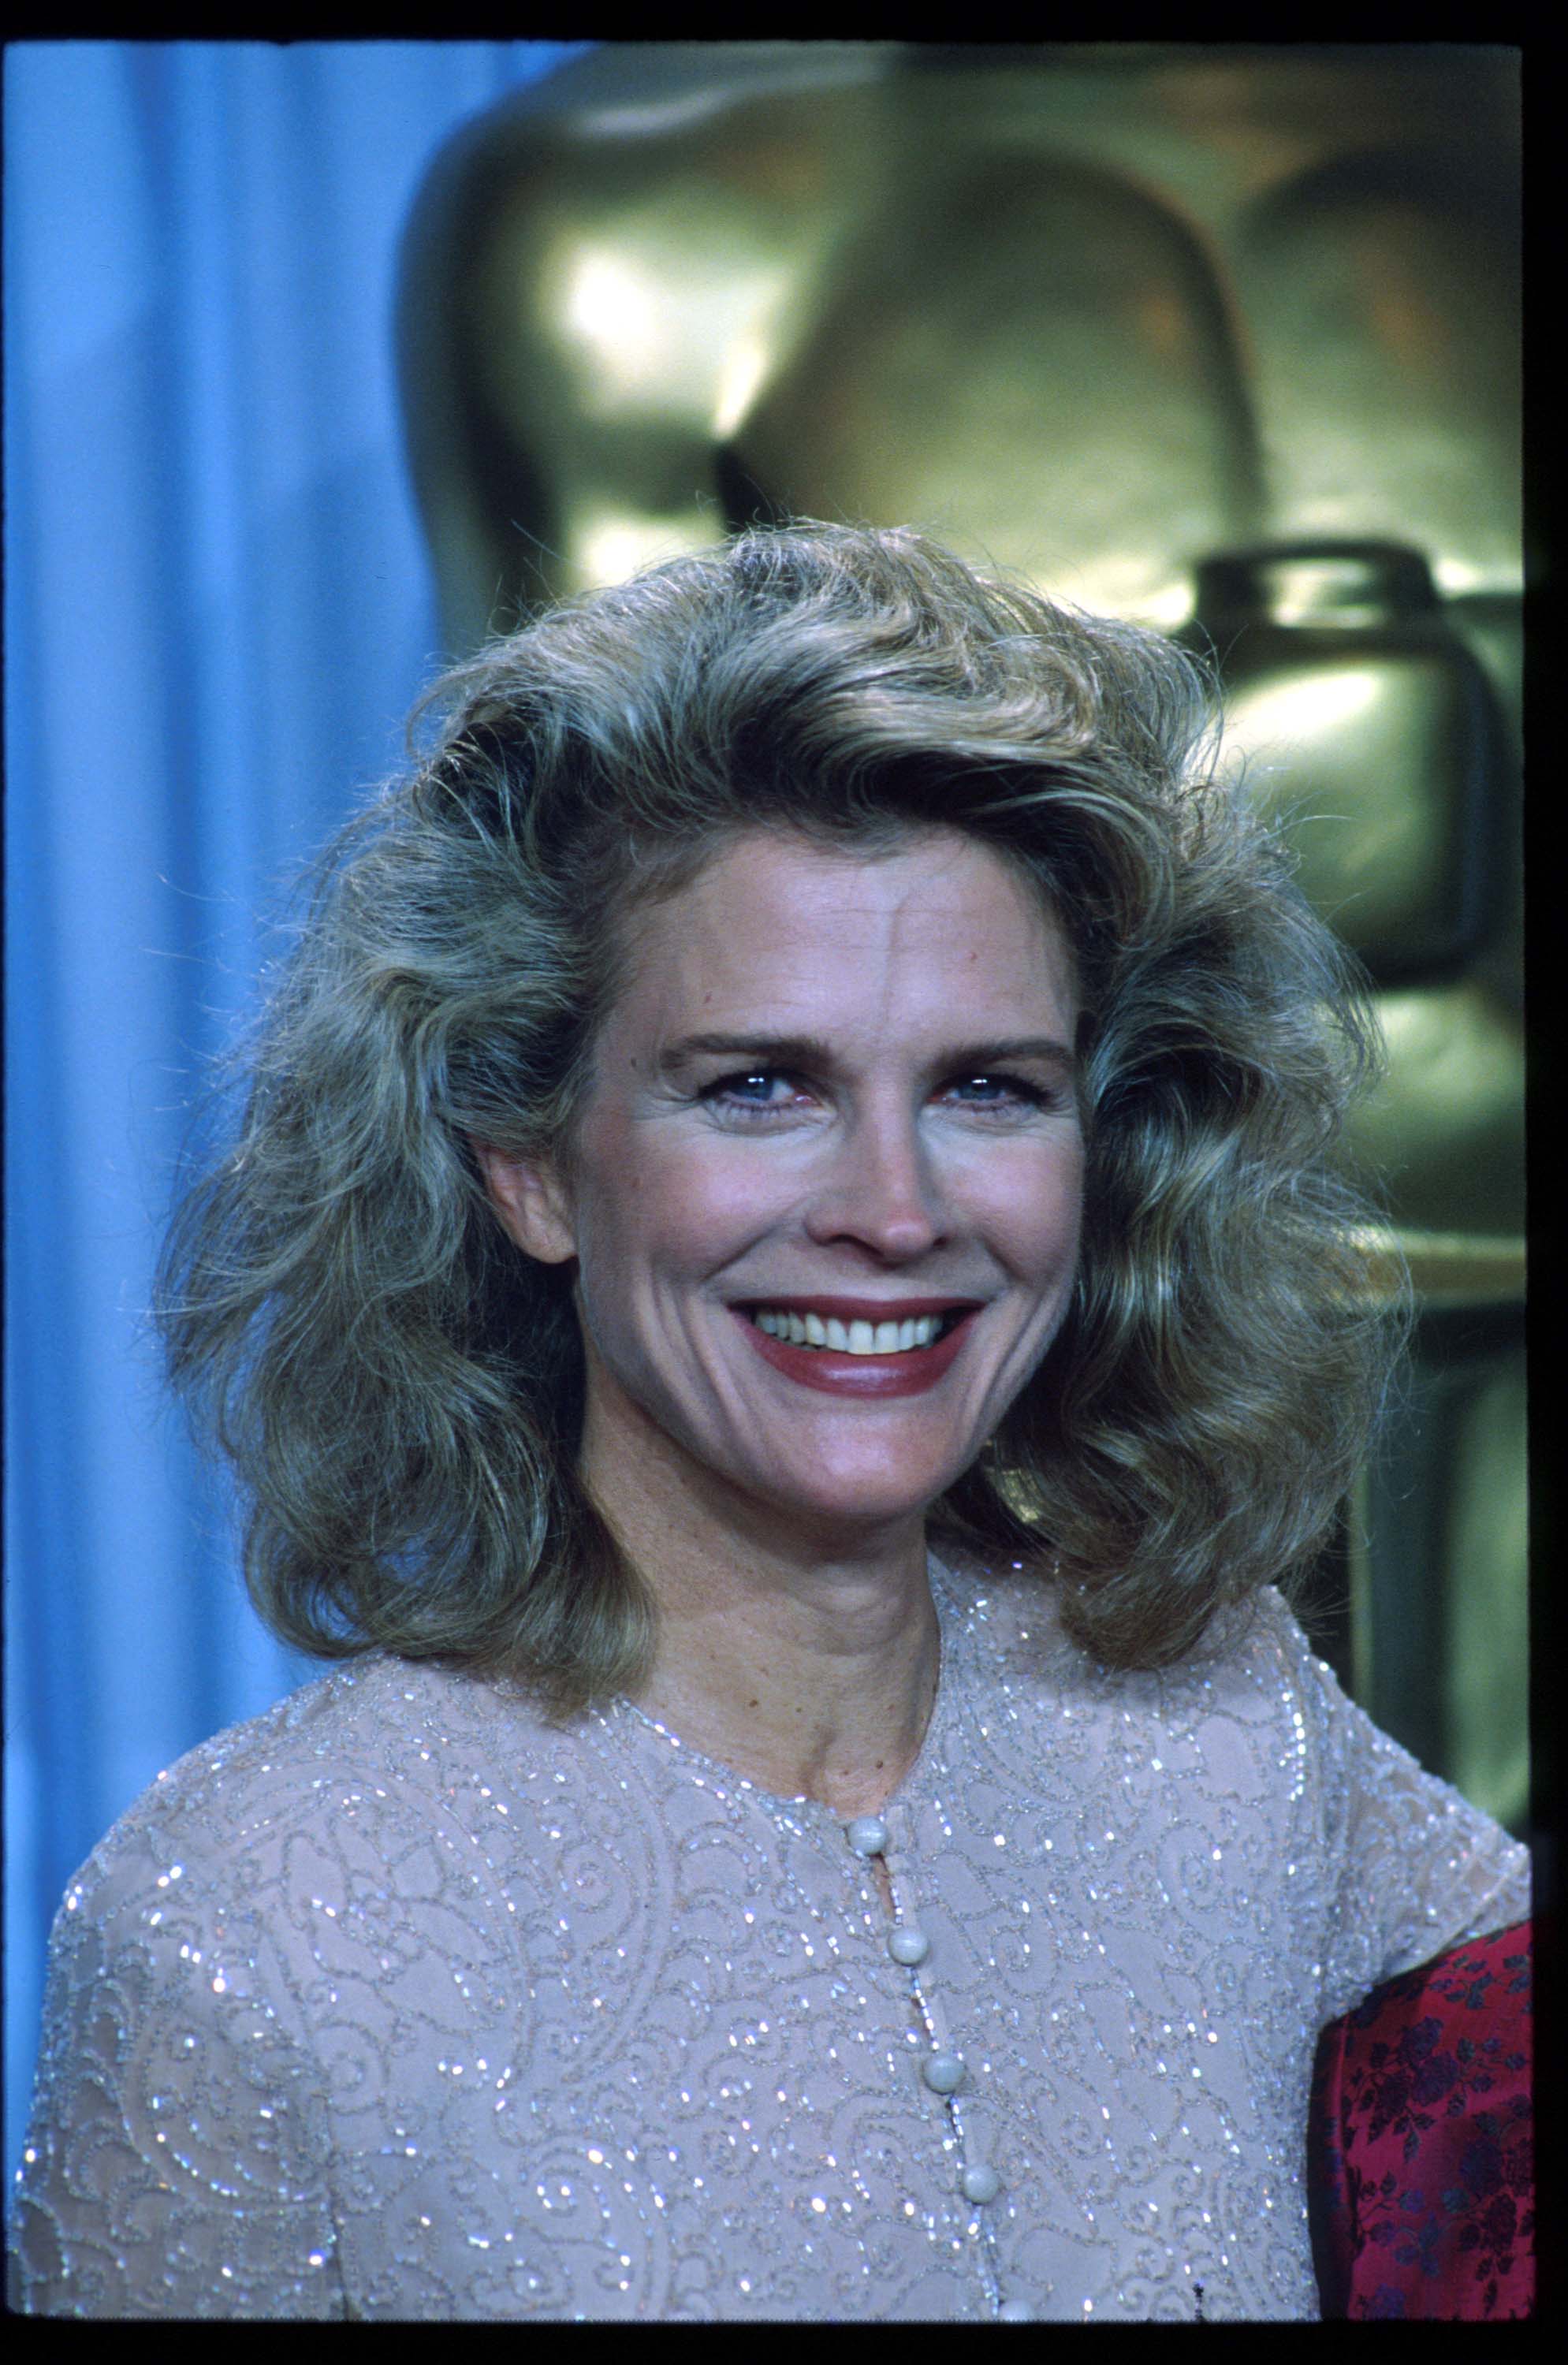 Candice Bergen stands backstage during the 62nd Academy Awards ceremony March 26, 1990 | Photo: GettyImages